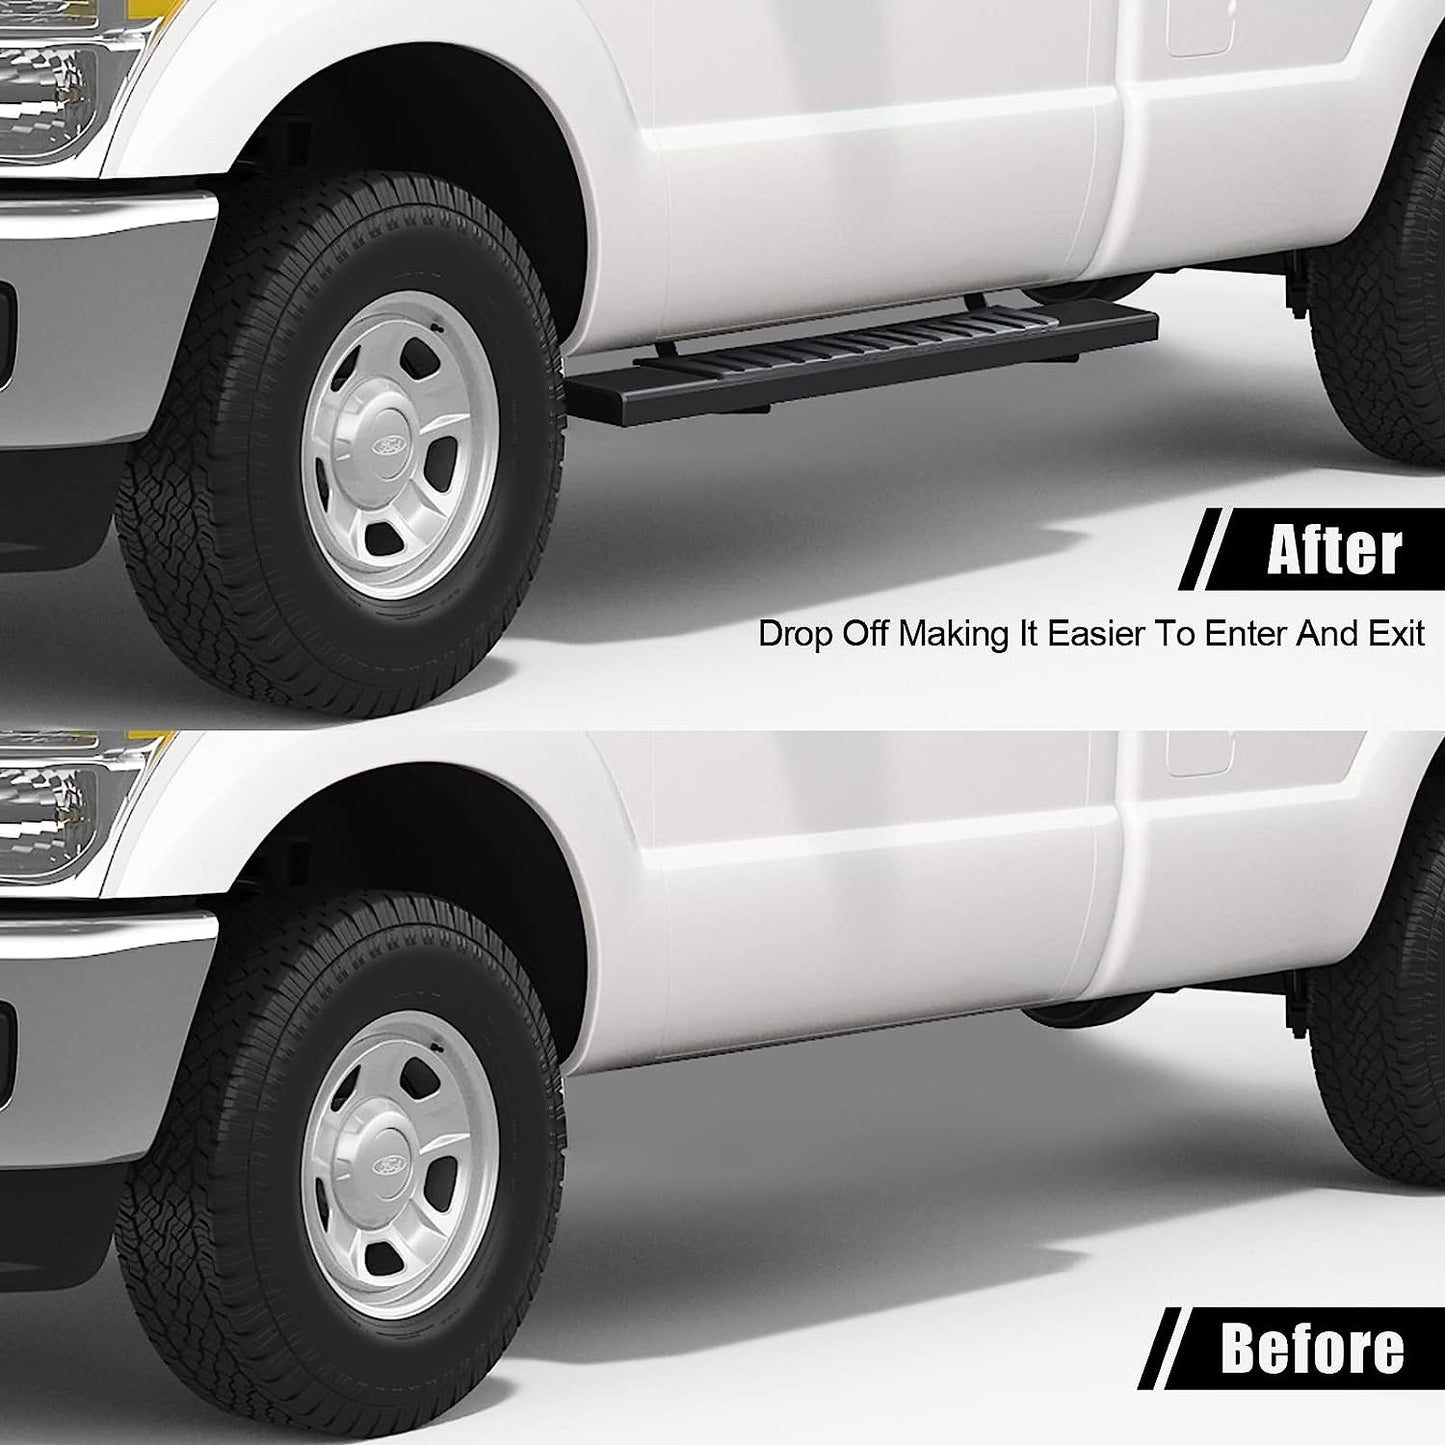 Running Boards Compatible with 2017-2024 Ford F250 F350 Superduty Regular/Standard/Single Cab H6 Style.- COMNOVA AUTOPART